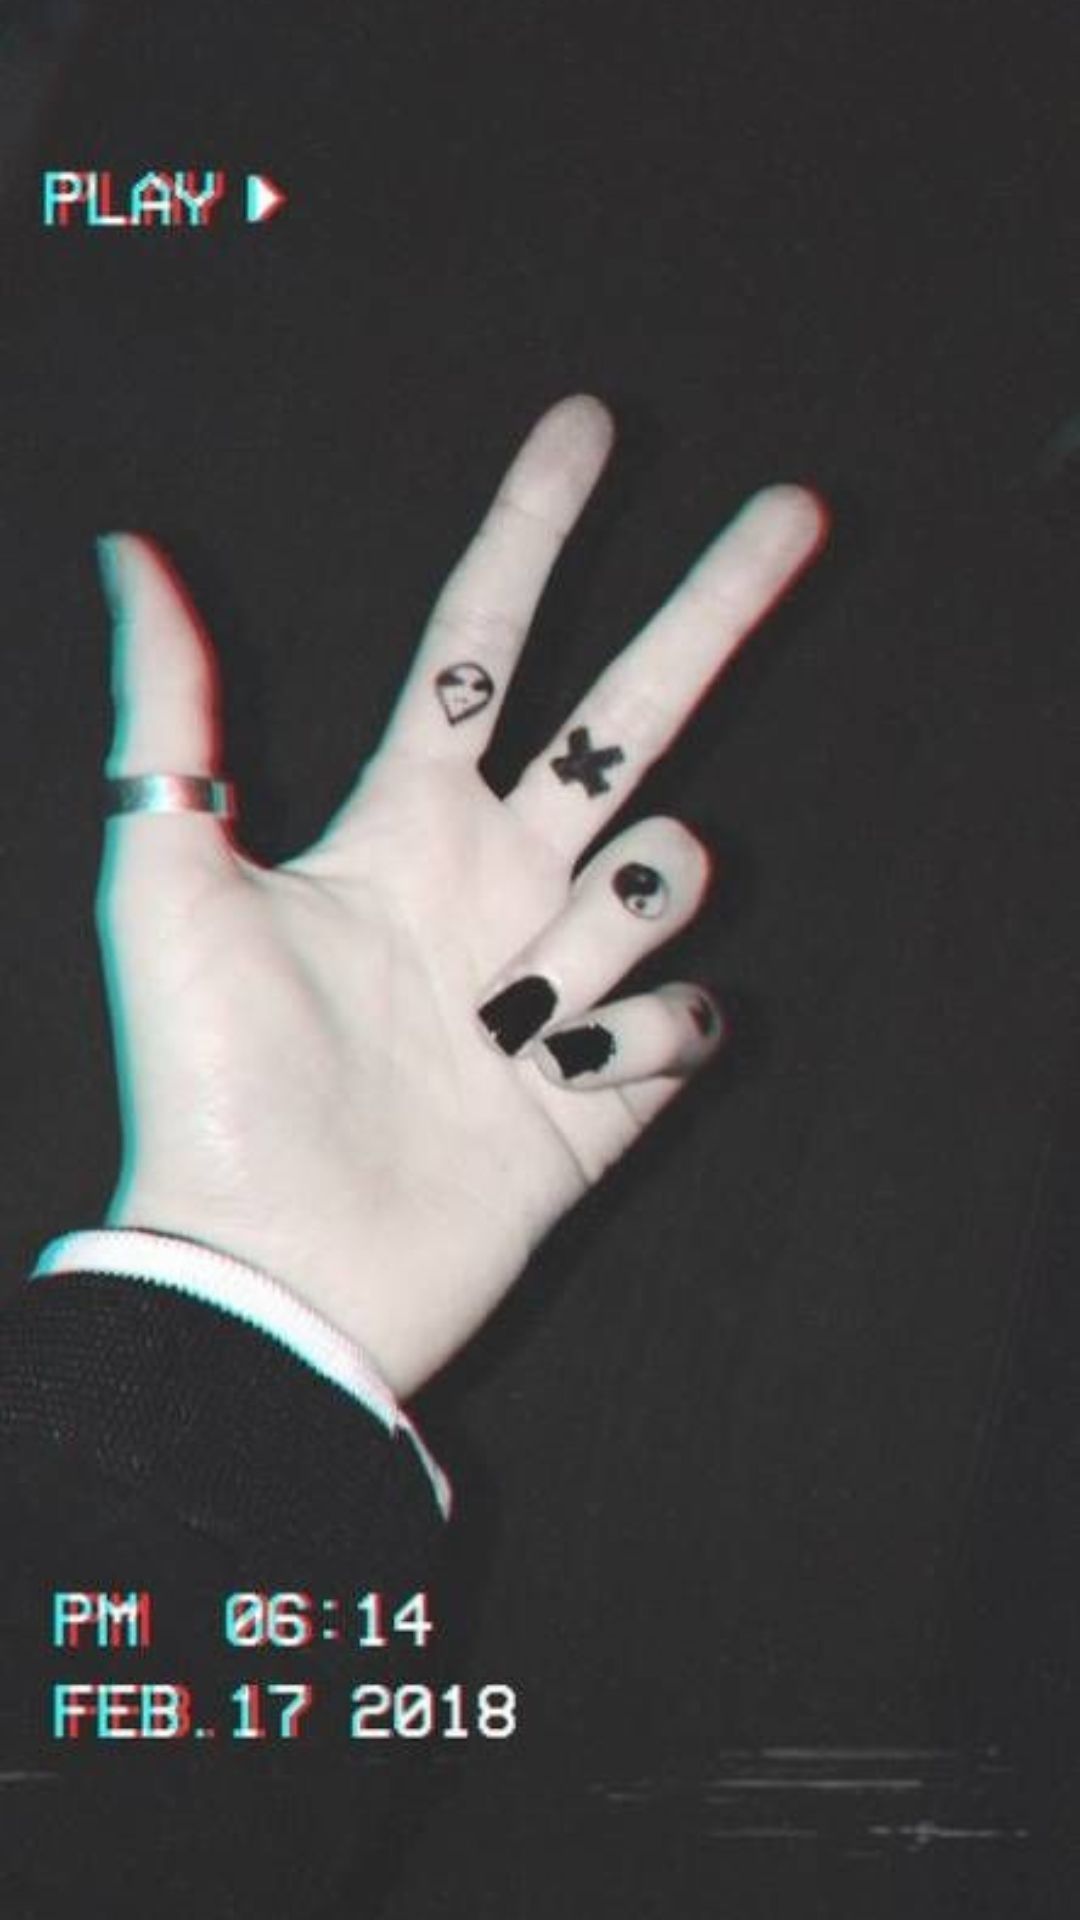 Aesthetic phone wallpaper of a hand making the peace sign with symbols on each finger. - Sad